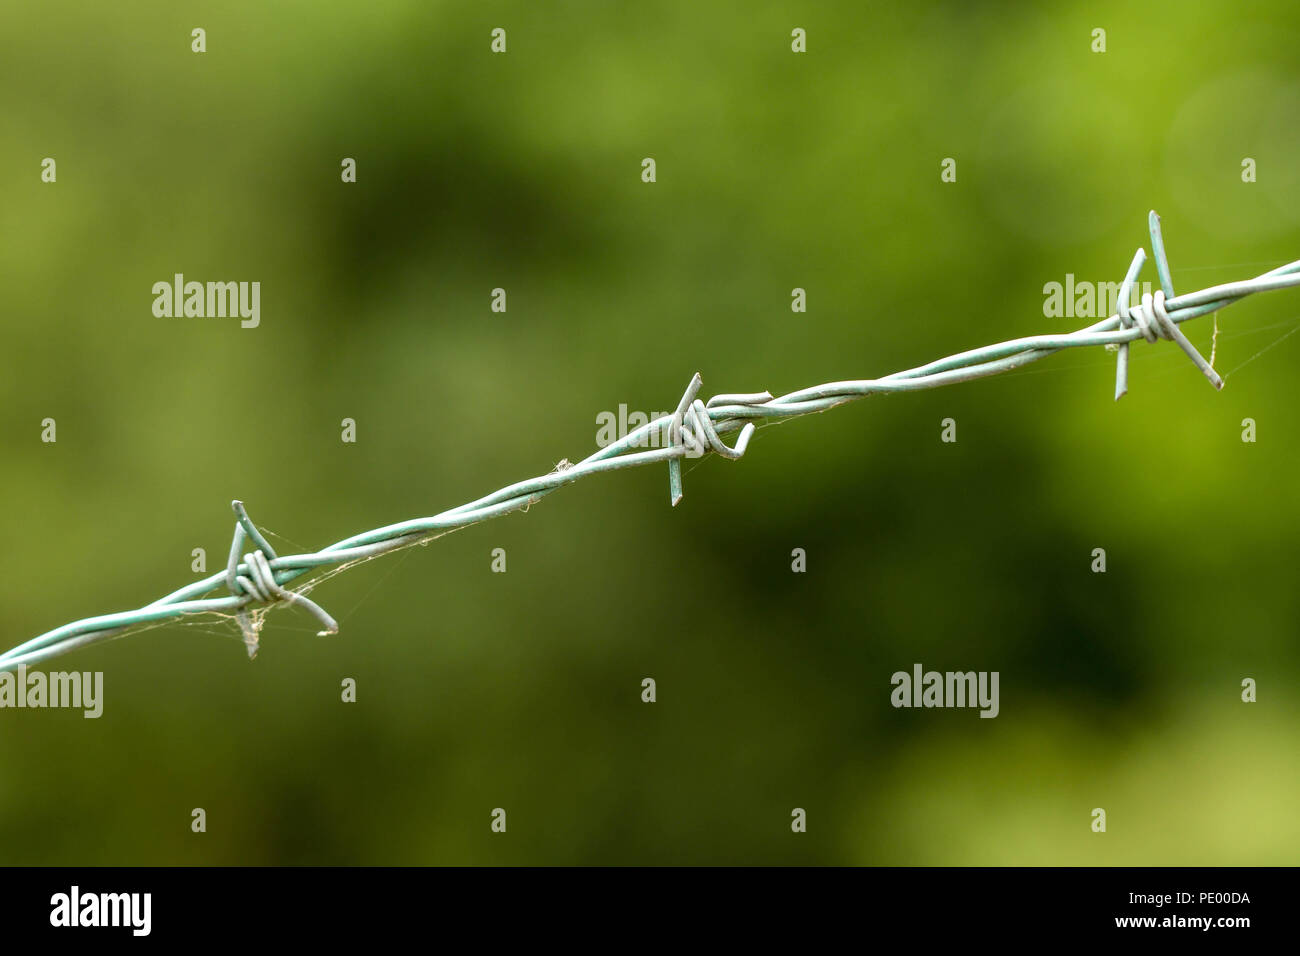 Close up landscape view of barbed wire against a plain green background of blurred foliage, with space for copy. Stock Photo